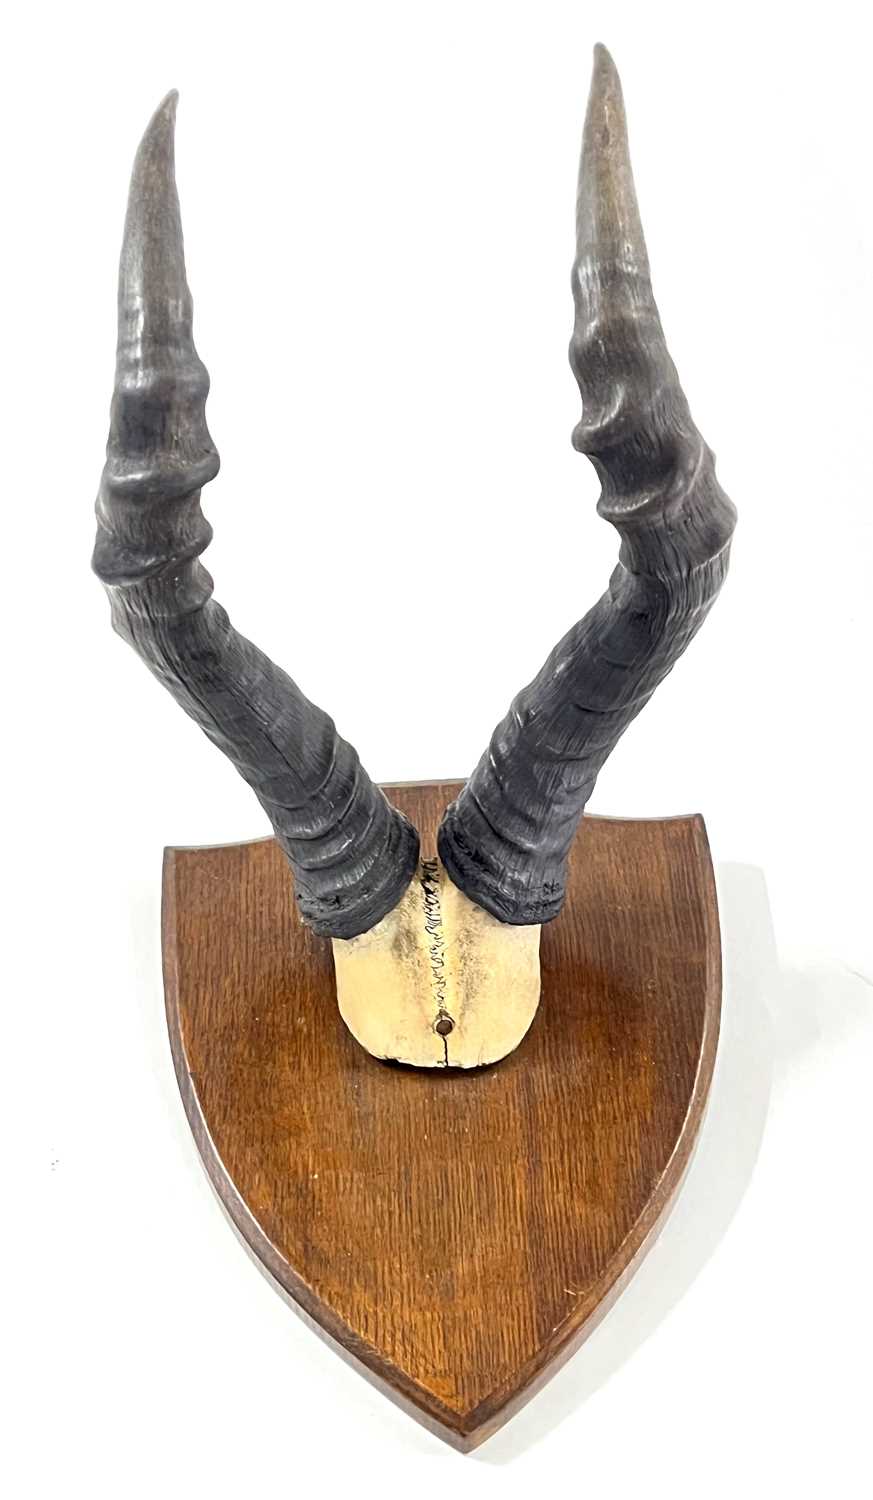 African Hartebeest, horns on top of skull mounted on wooden shield